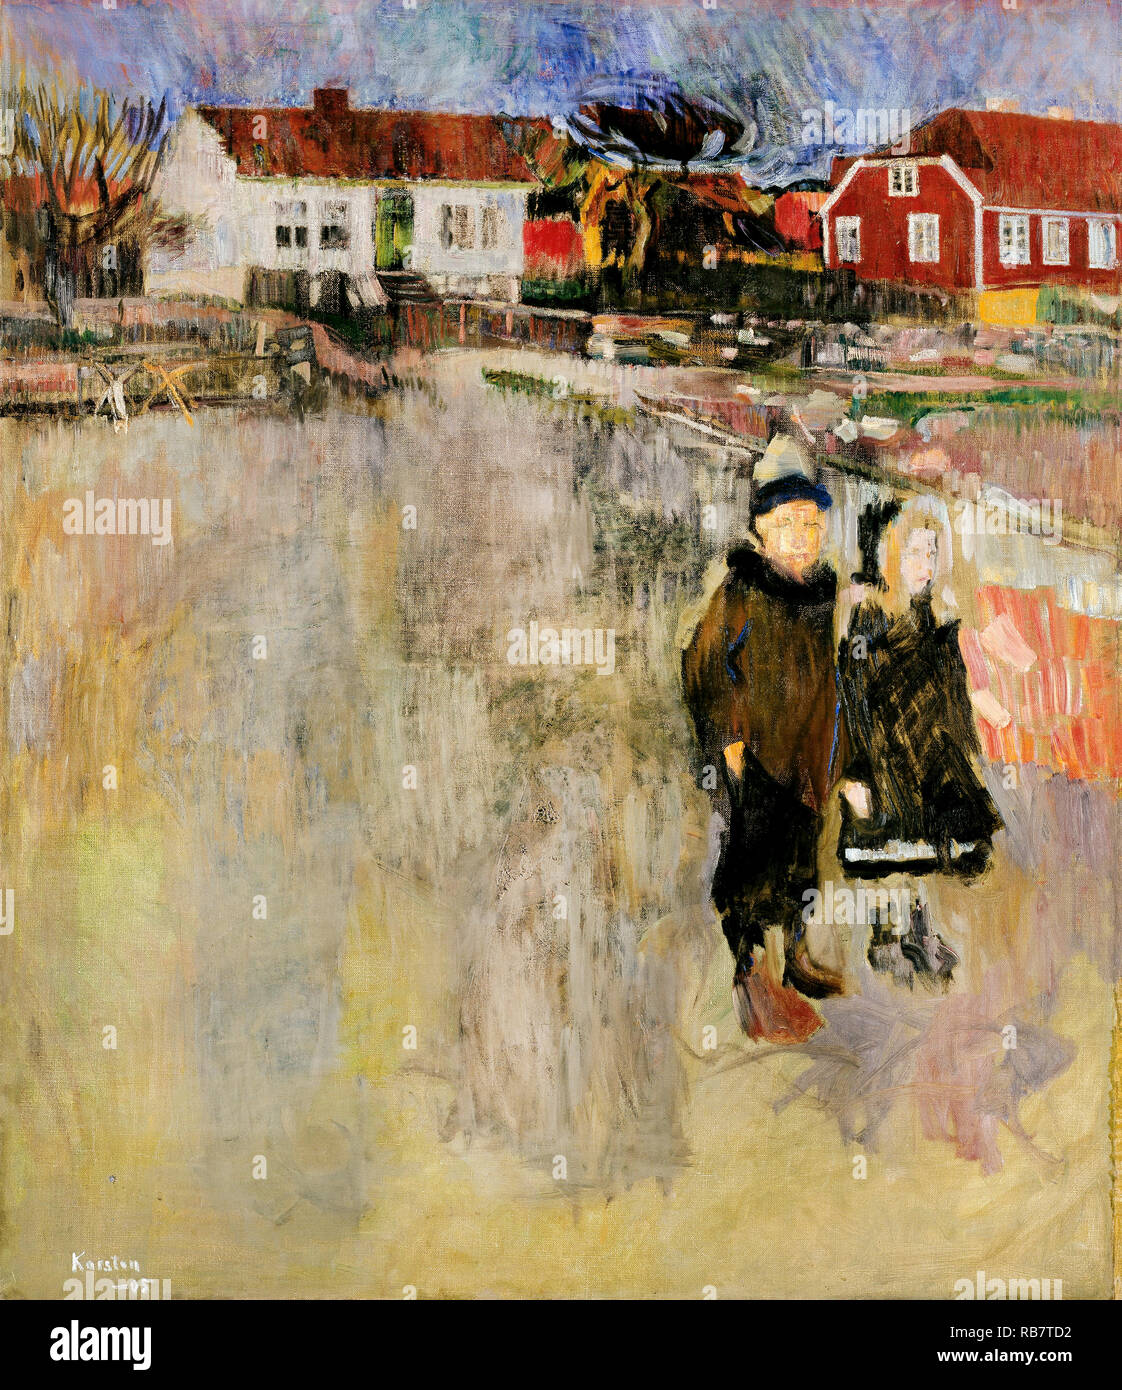 Ludvig Karsten, Spring Evening at Ula 1905 Oil on canvas, National Gallery of Norway, Oslo, Norway. Stock Photo